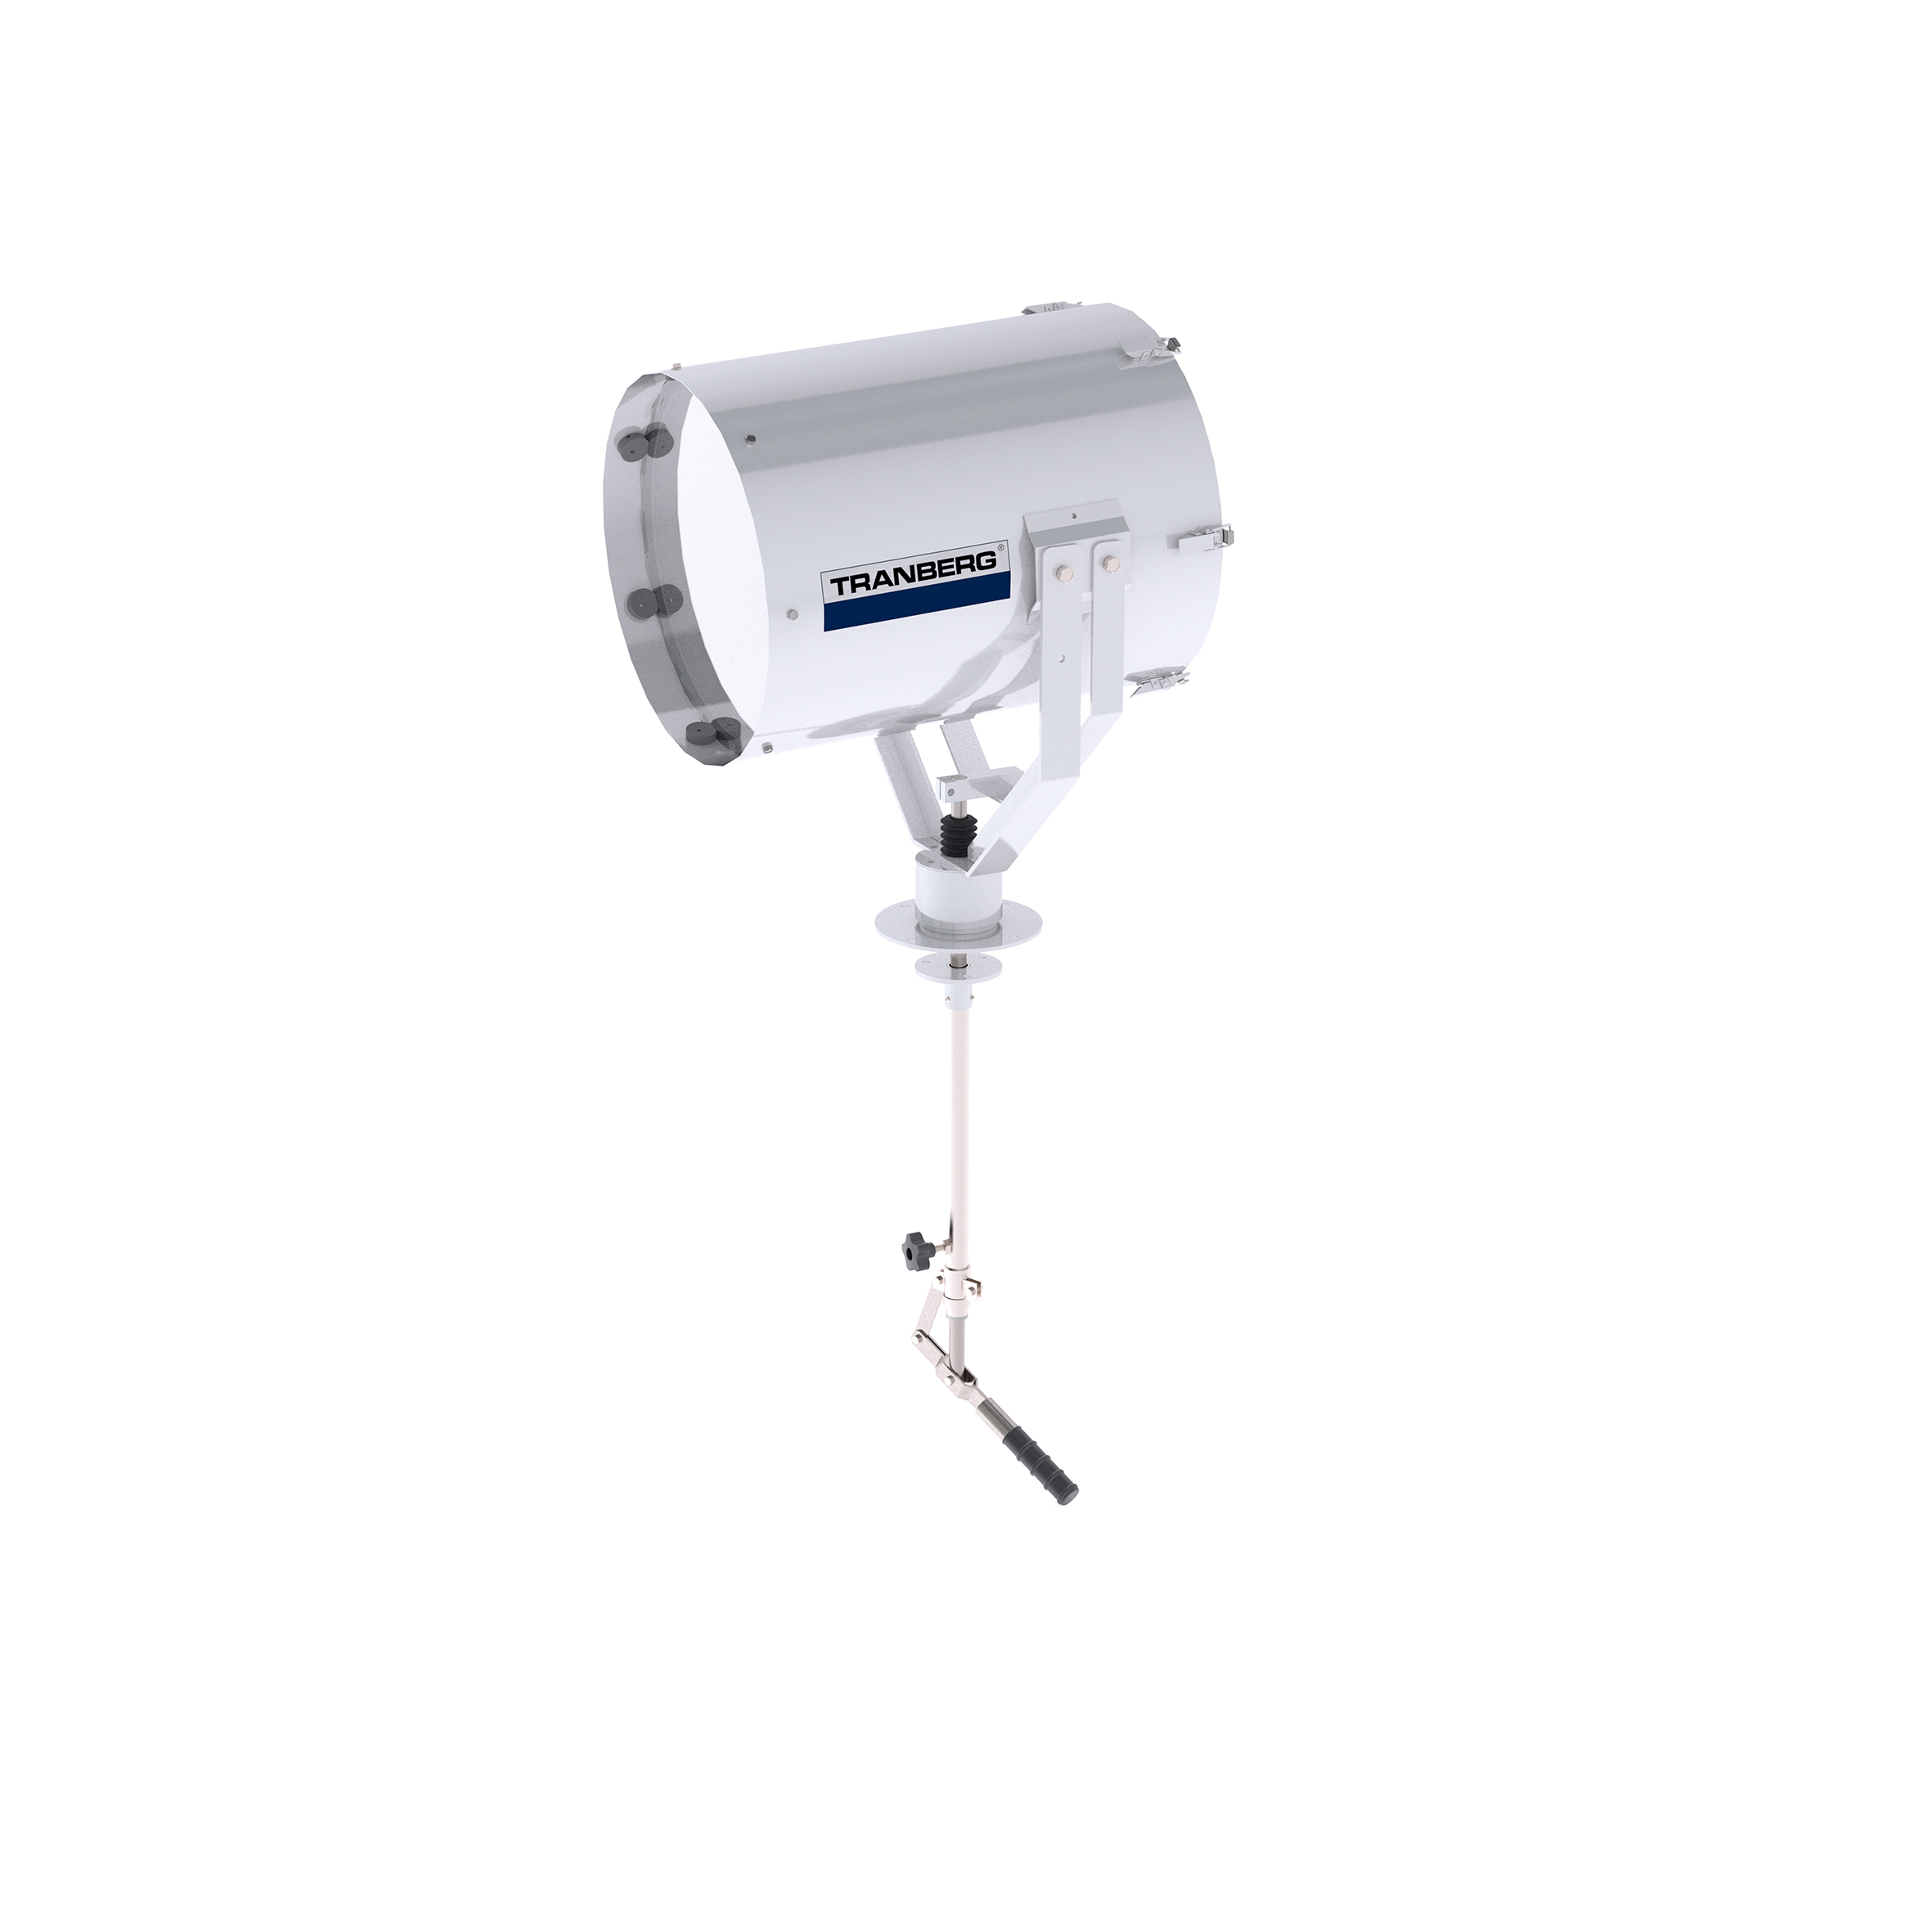 TEF 2630 Searchlight: Xenon 1600W bulb incl, 230V, Bridge Controlled, Stainless Steel photo